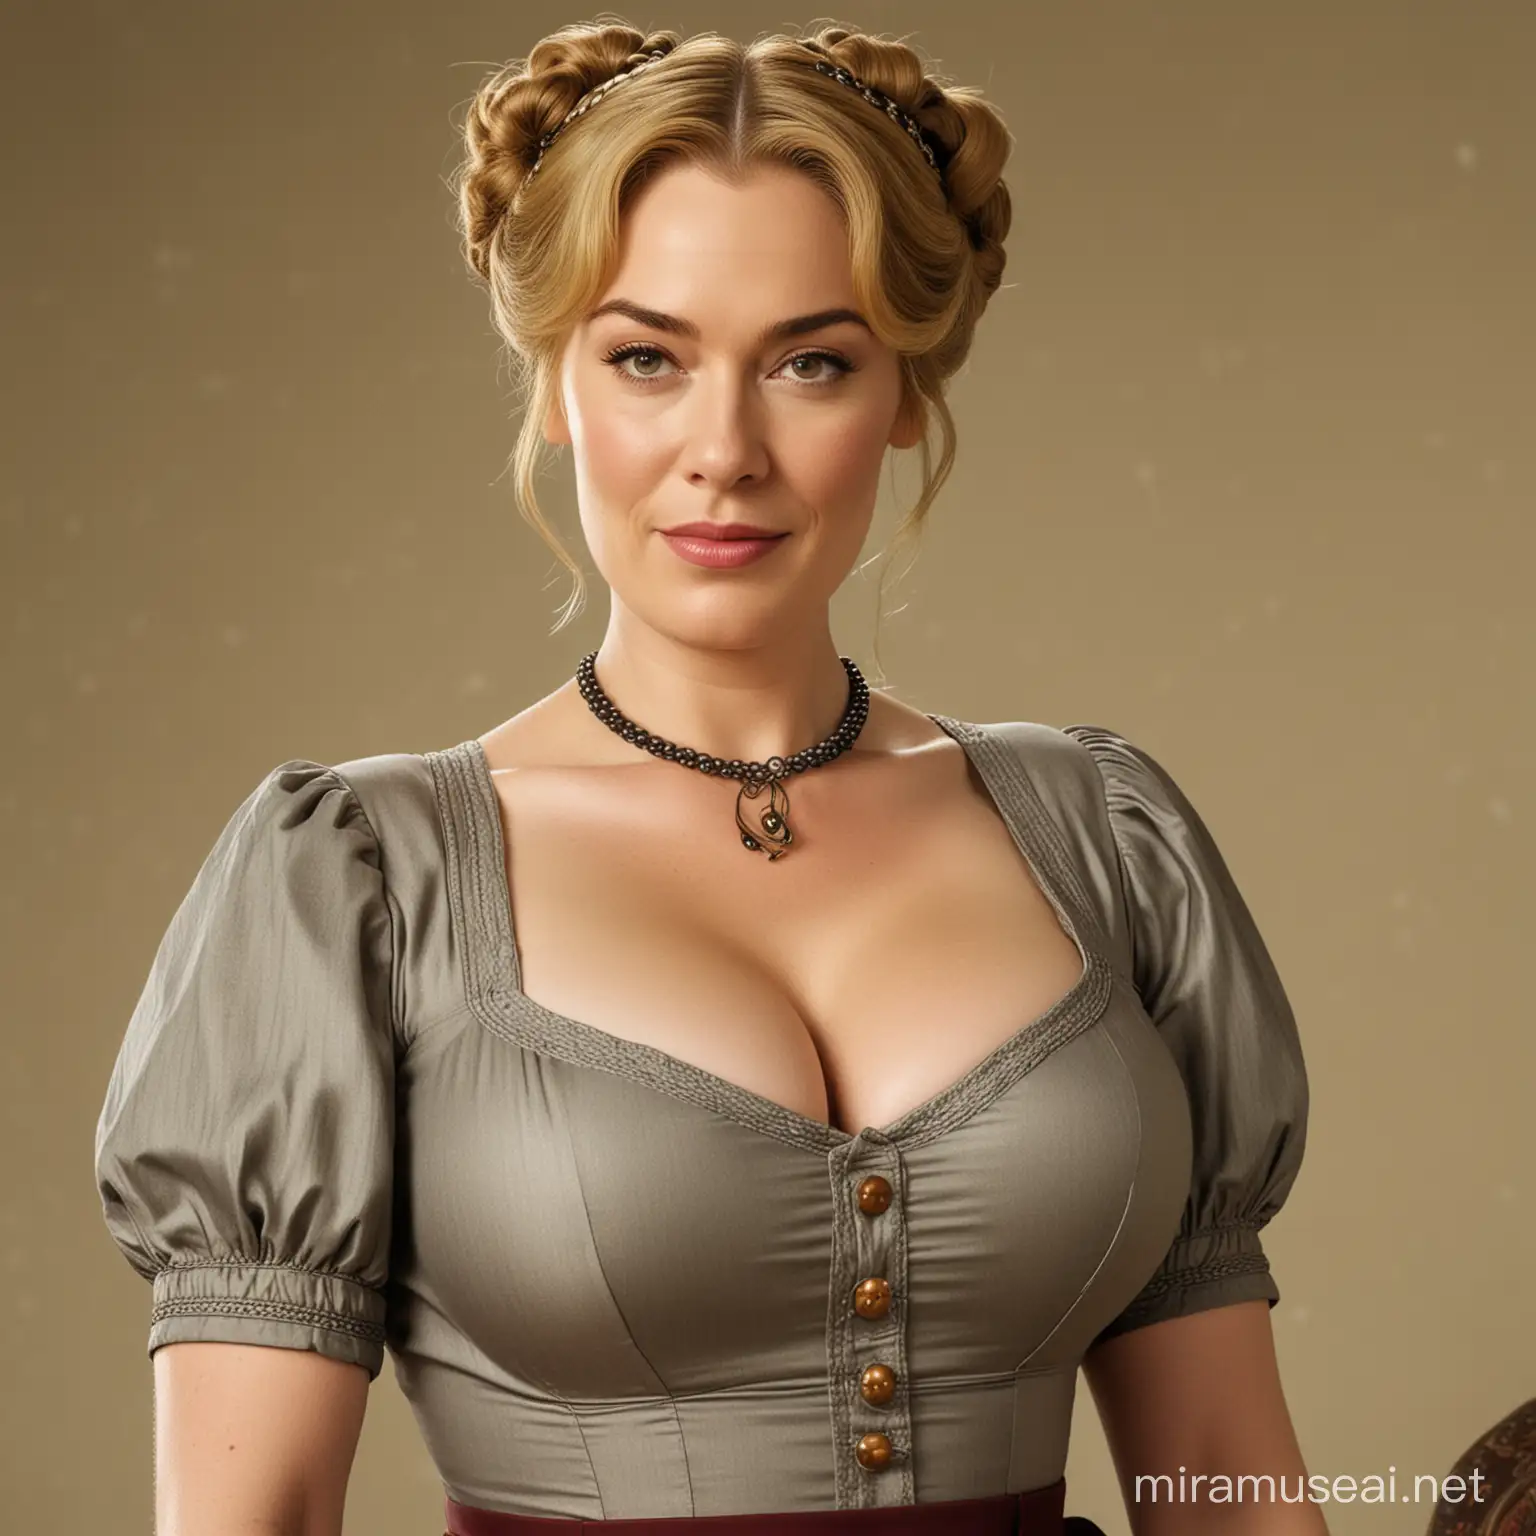 cersei lannister dressed as a 1940s housewife in pigtails, bbw, giant breast, massive cleavage